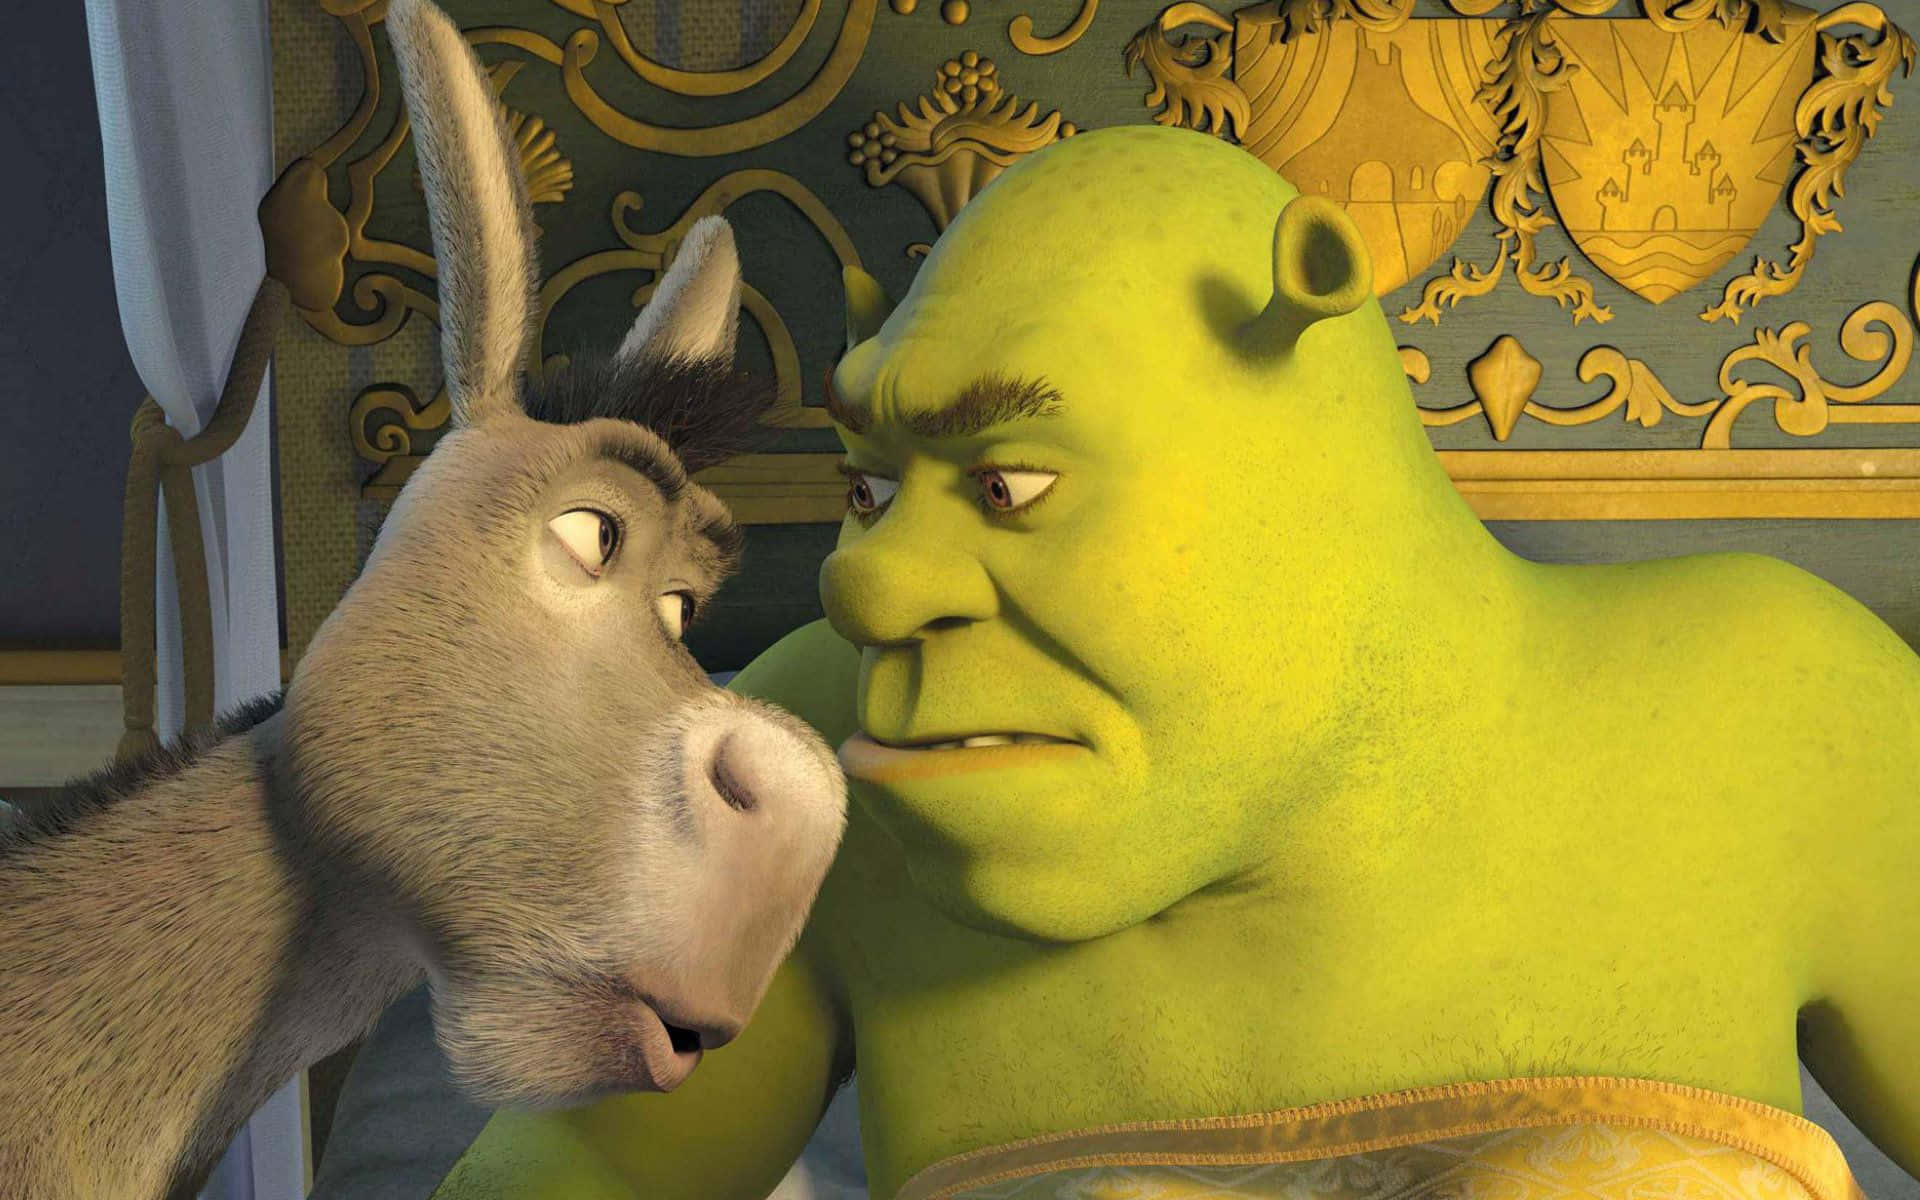 "Shrek is Here to Make You Laugh!"